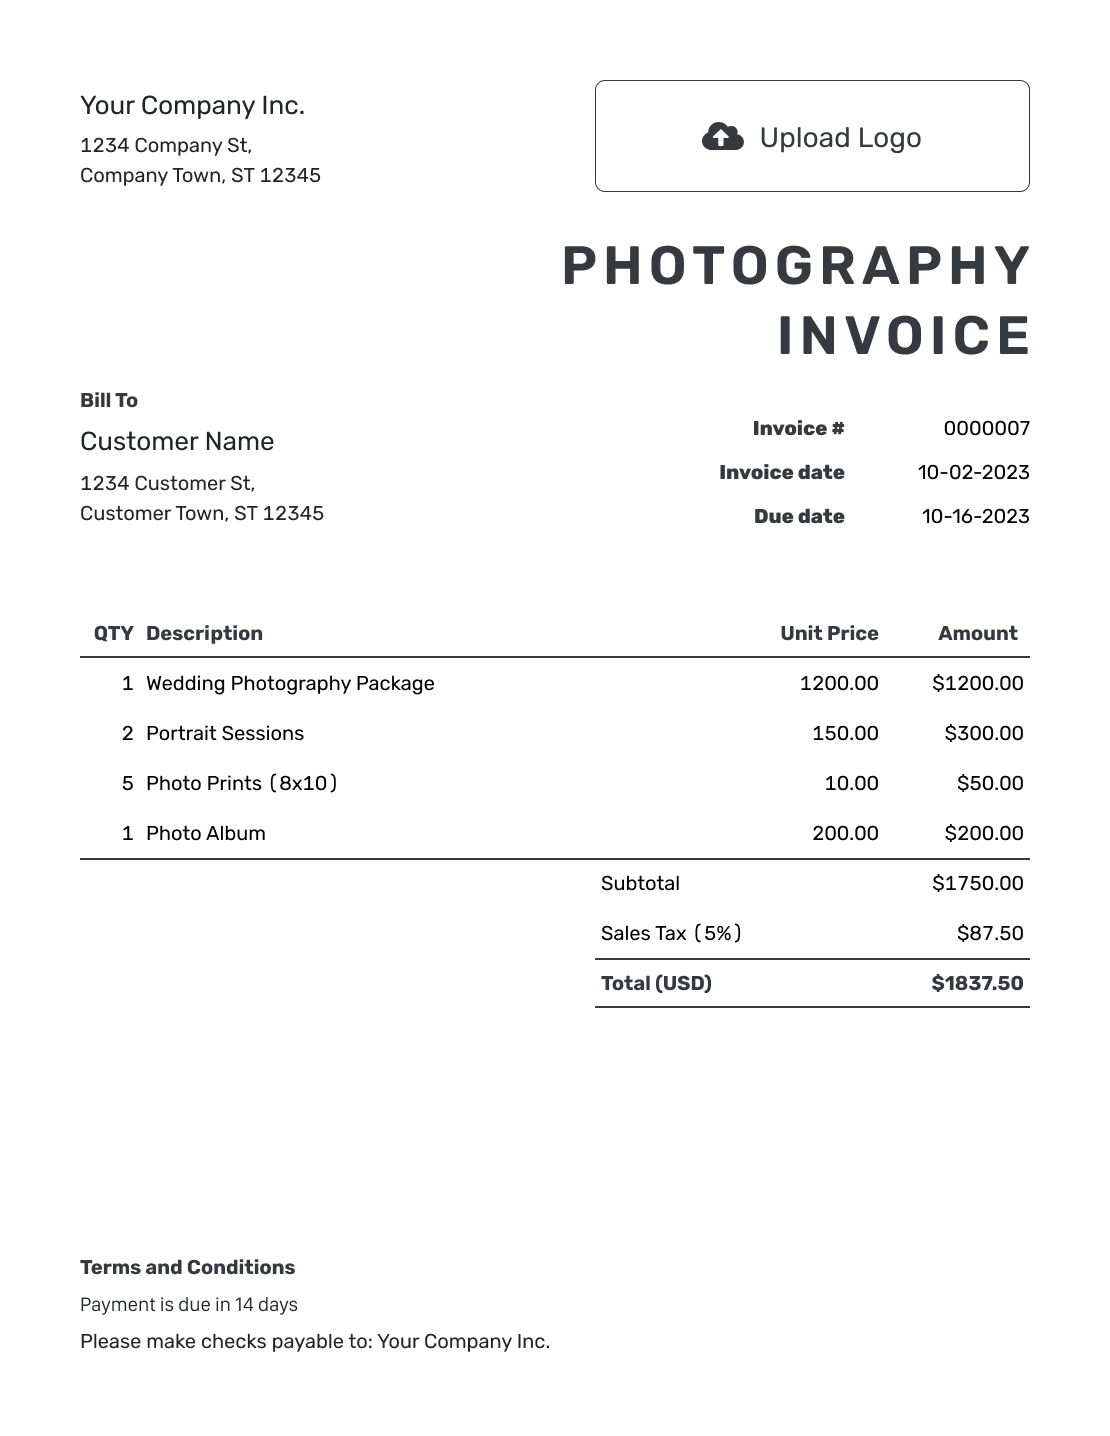 Printable Photography Invoice Template